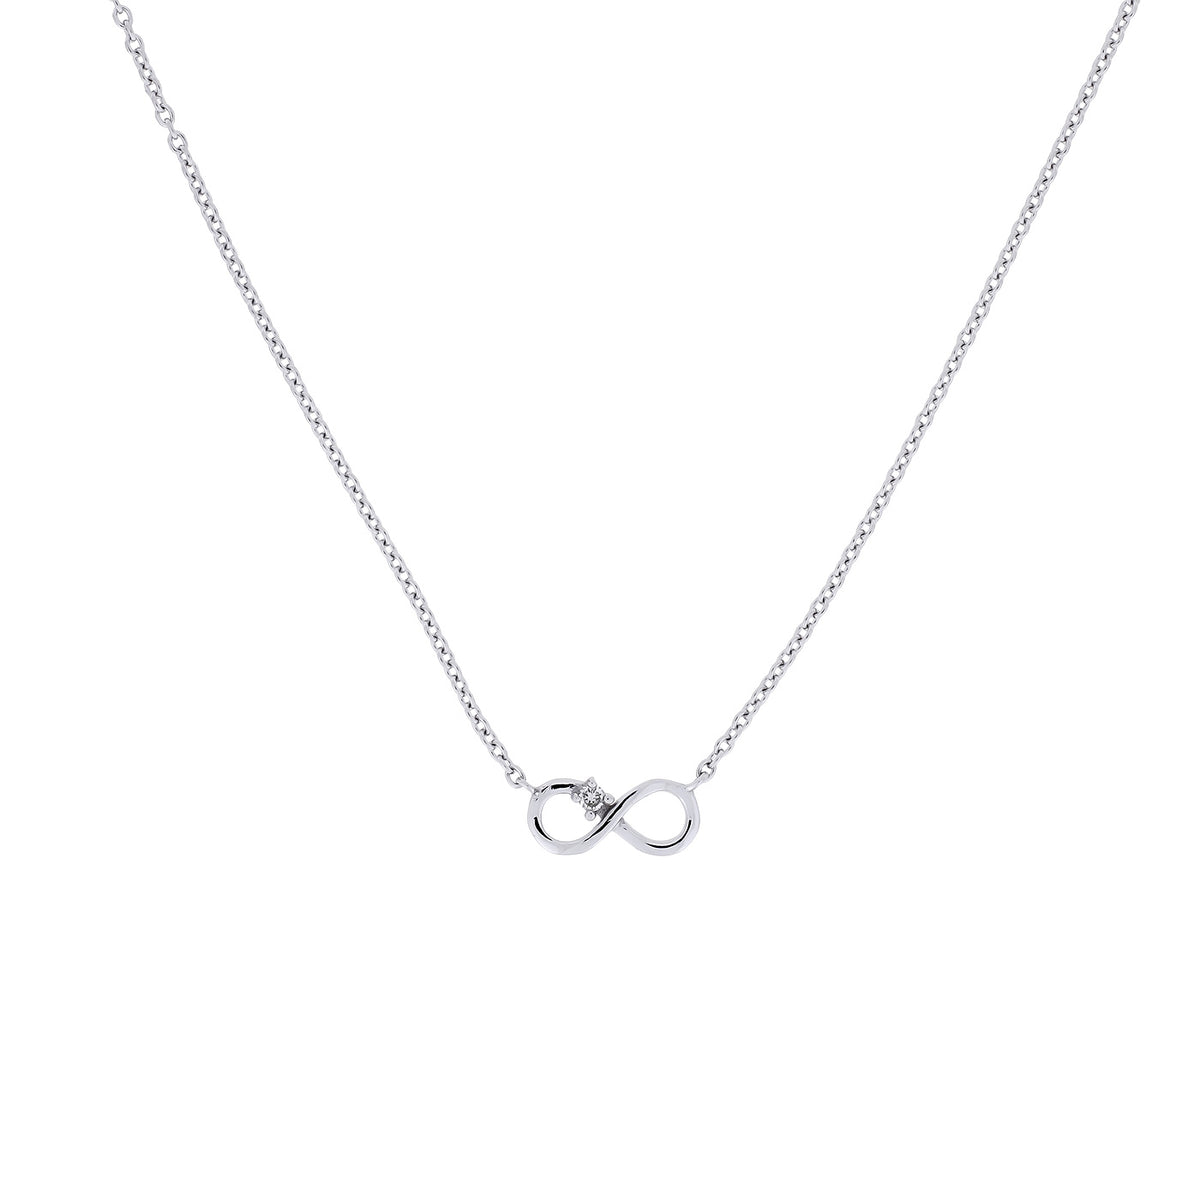 9 Carat White Gold and Diamond Infinity Necklace